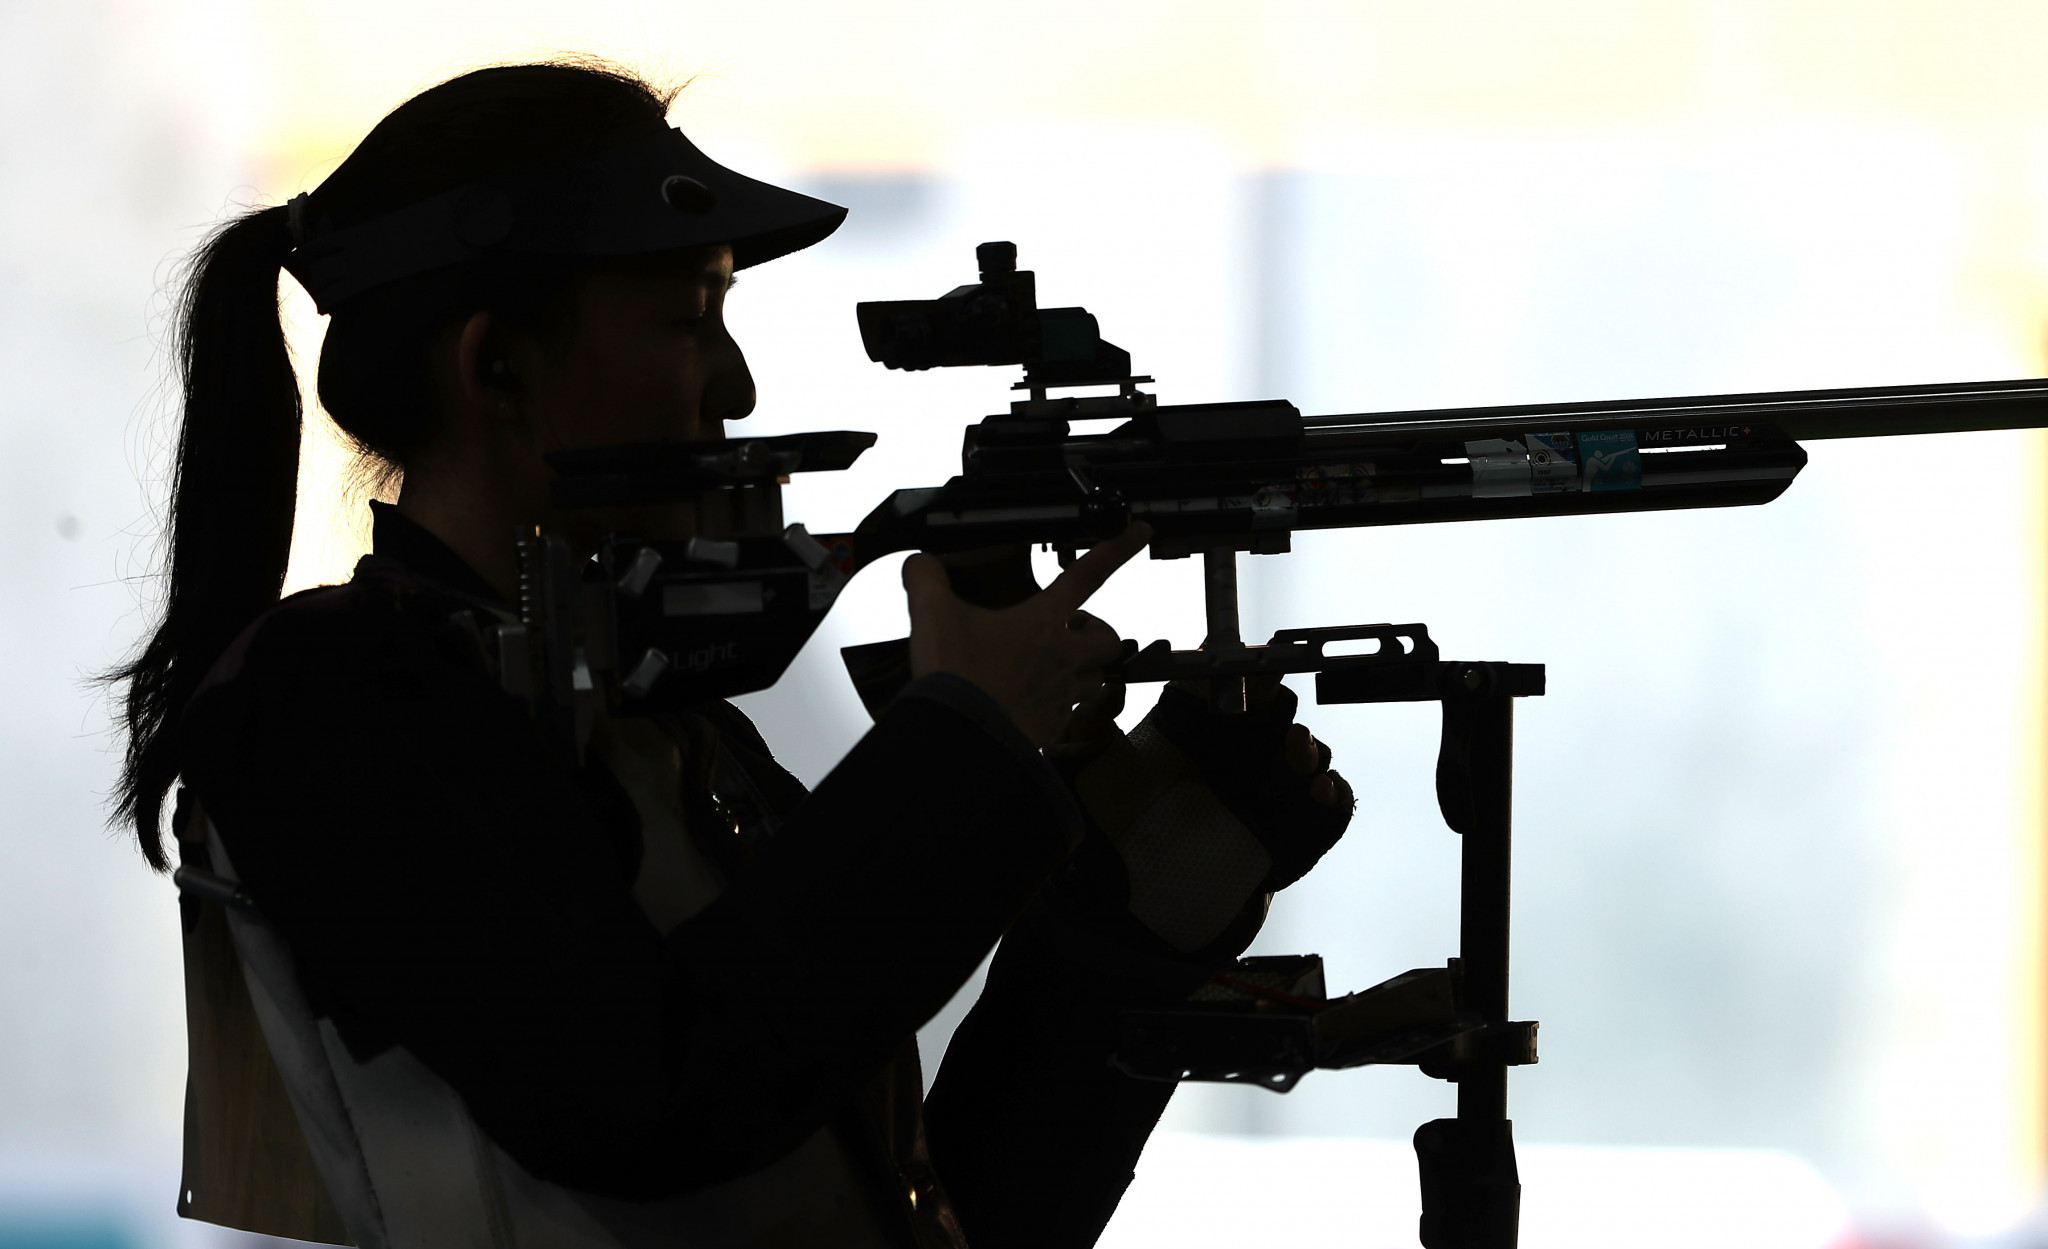 Serbian Teodora Vukojevic scored 42 in total to win the gold medal in the women’s 10m air rifle final ©Getty Images